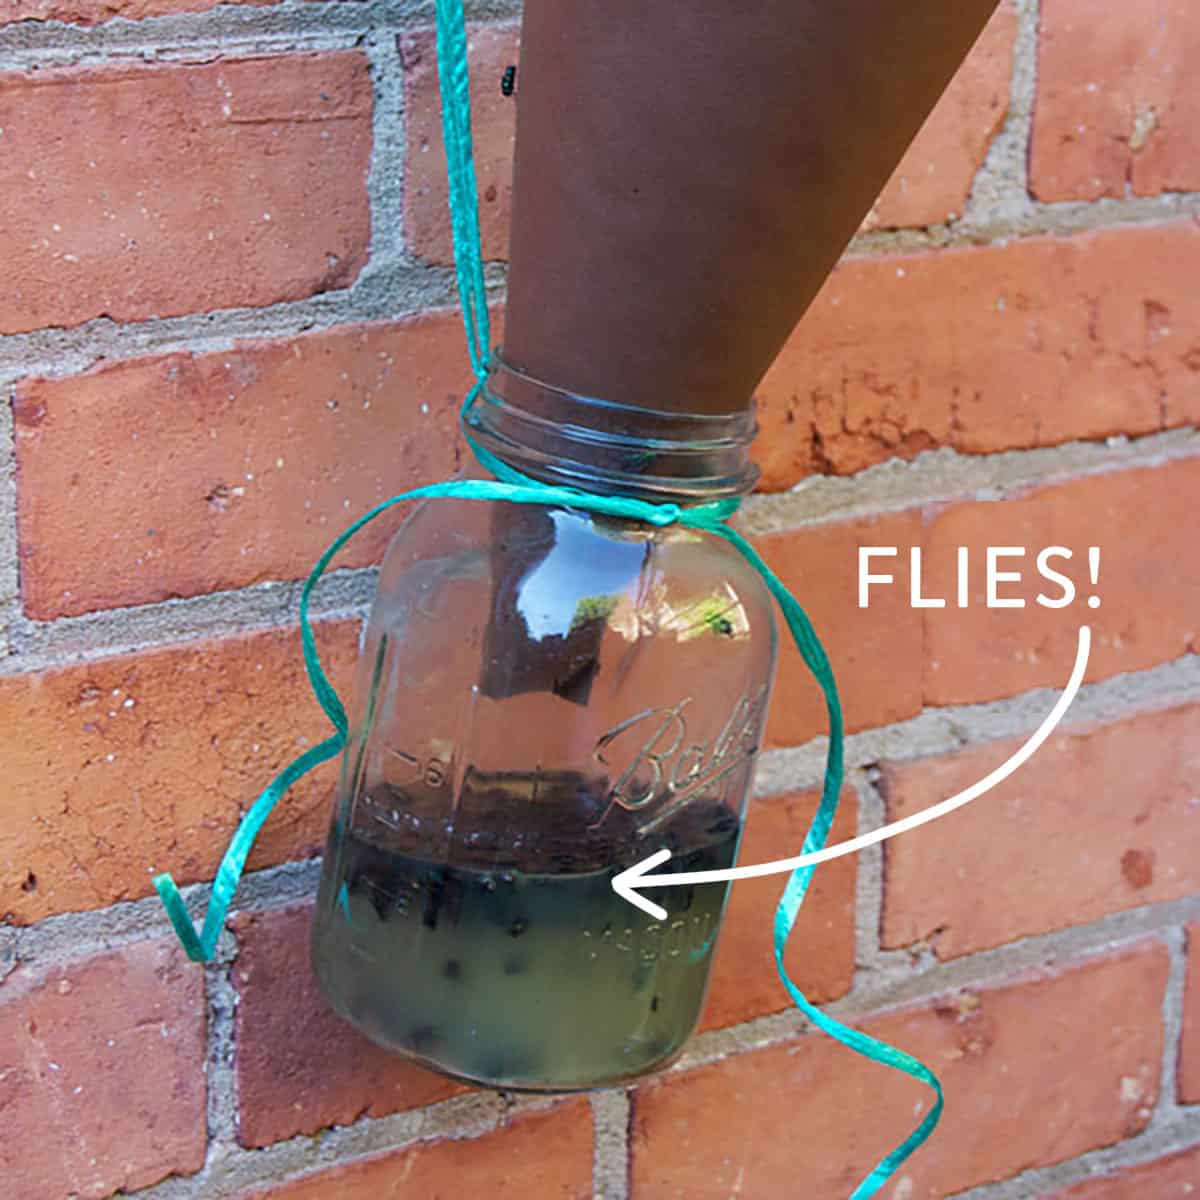 What Is the Best House Fly Trap